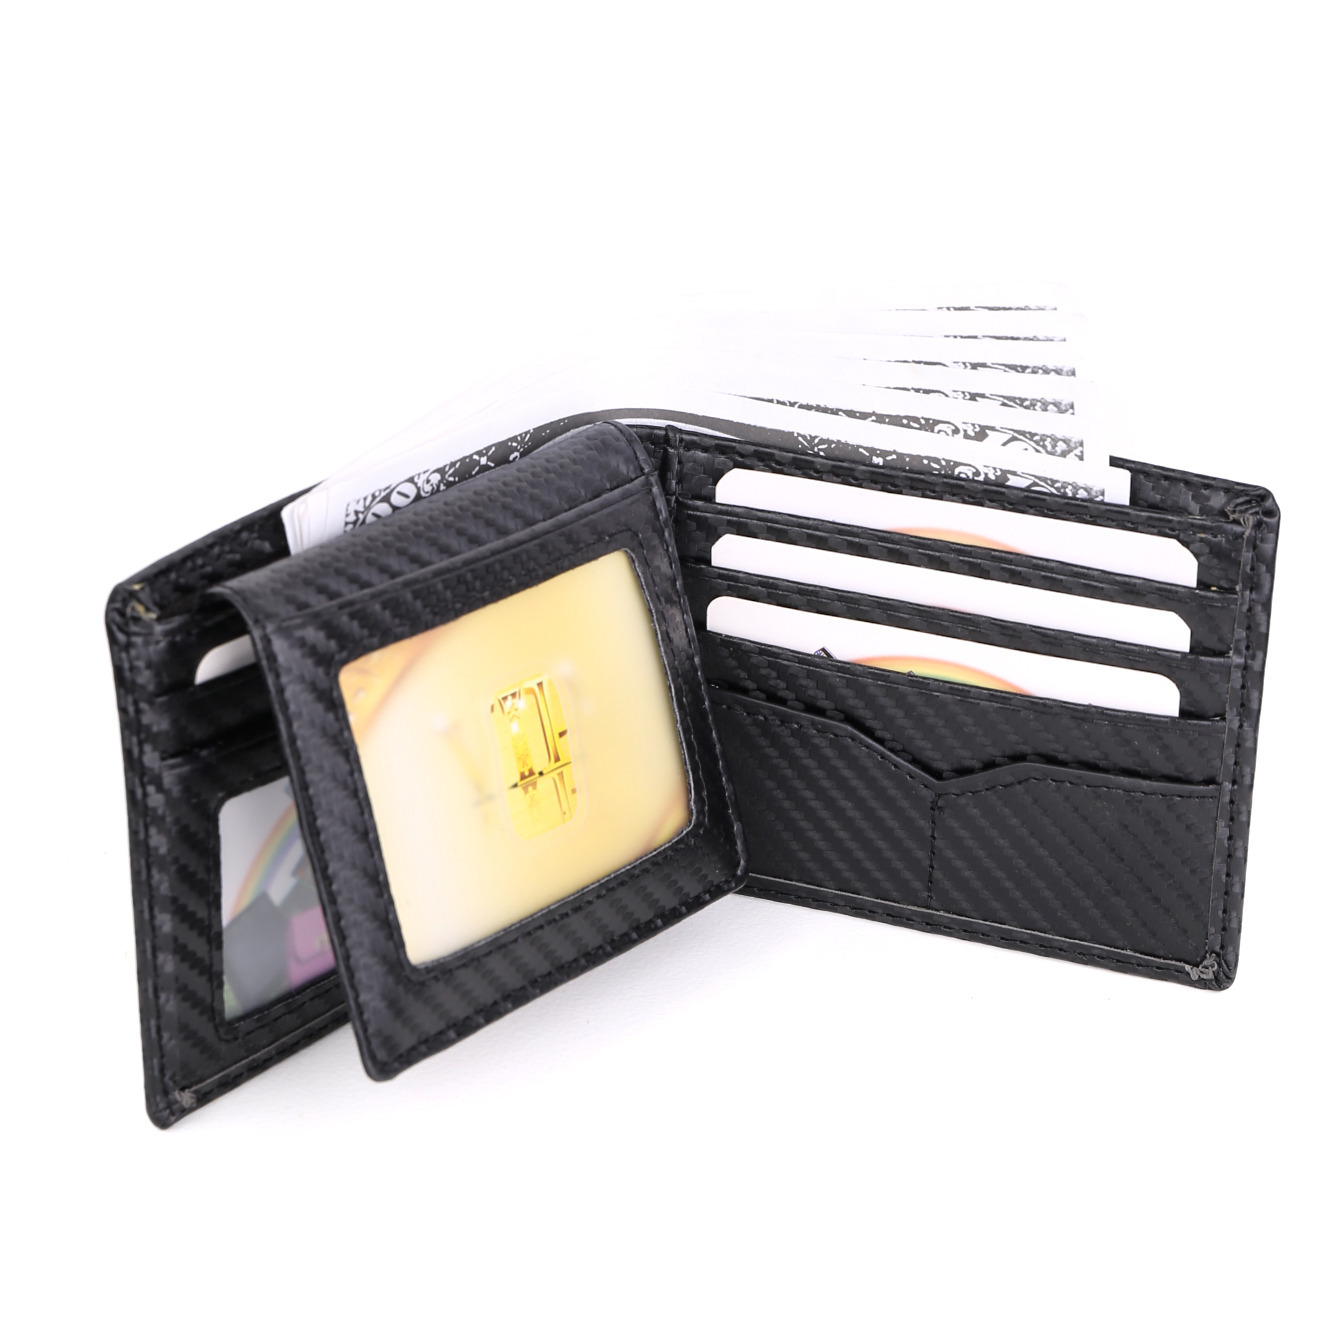 Carbon Fiber Travel Slim Wallet Total 12 Slots With 2 Folded Id Transparent  Slots And 8+2 Slots Rfid Blocking Bifold Classic Wallet For Men  (brown&black) - Temu